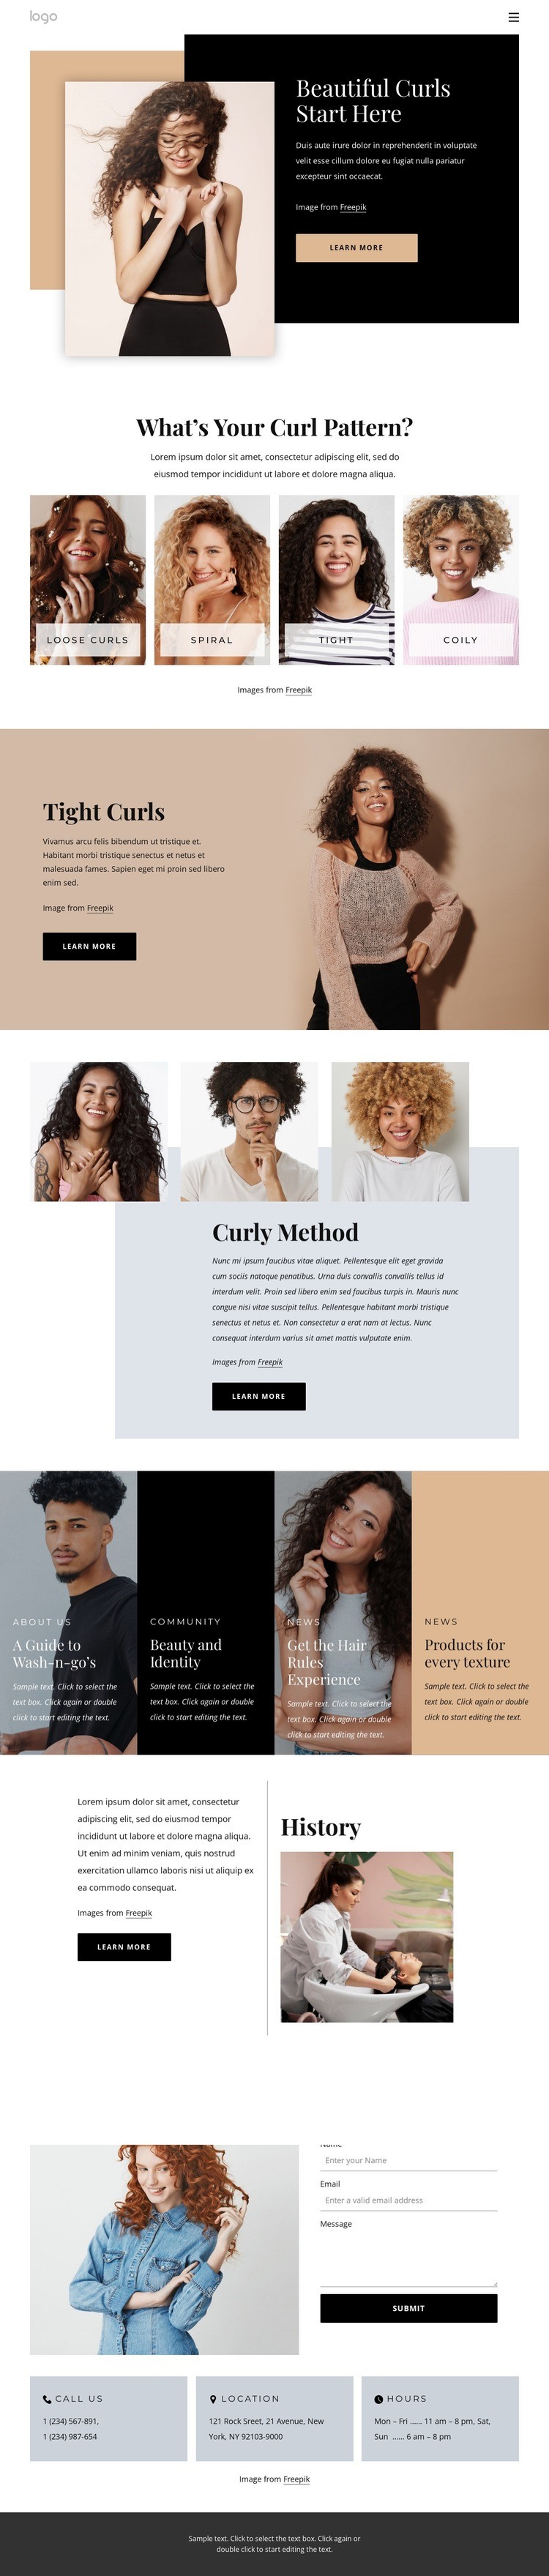 Bring out the best in your curls Web Page Design